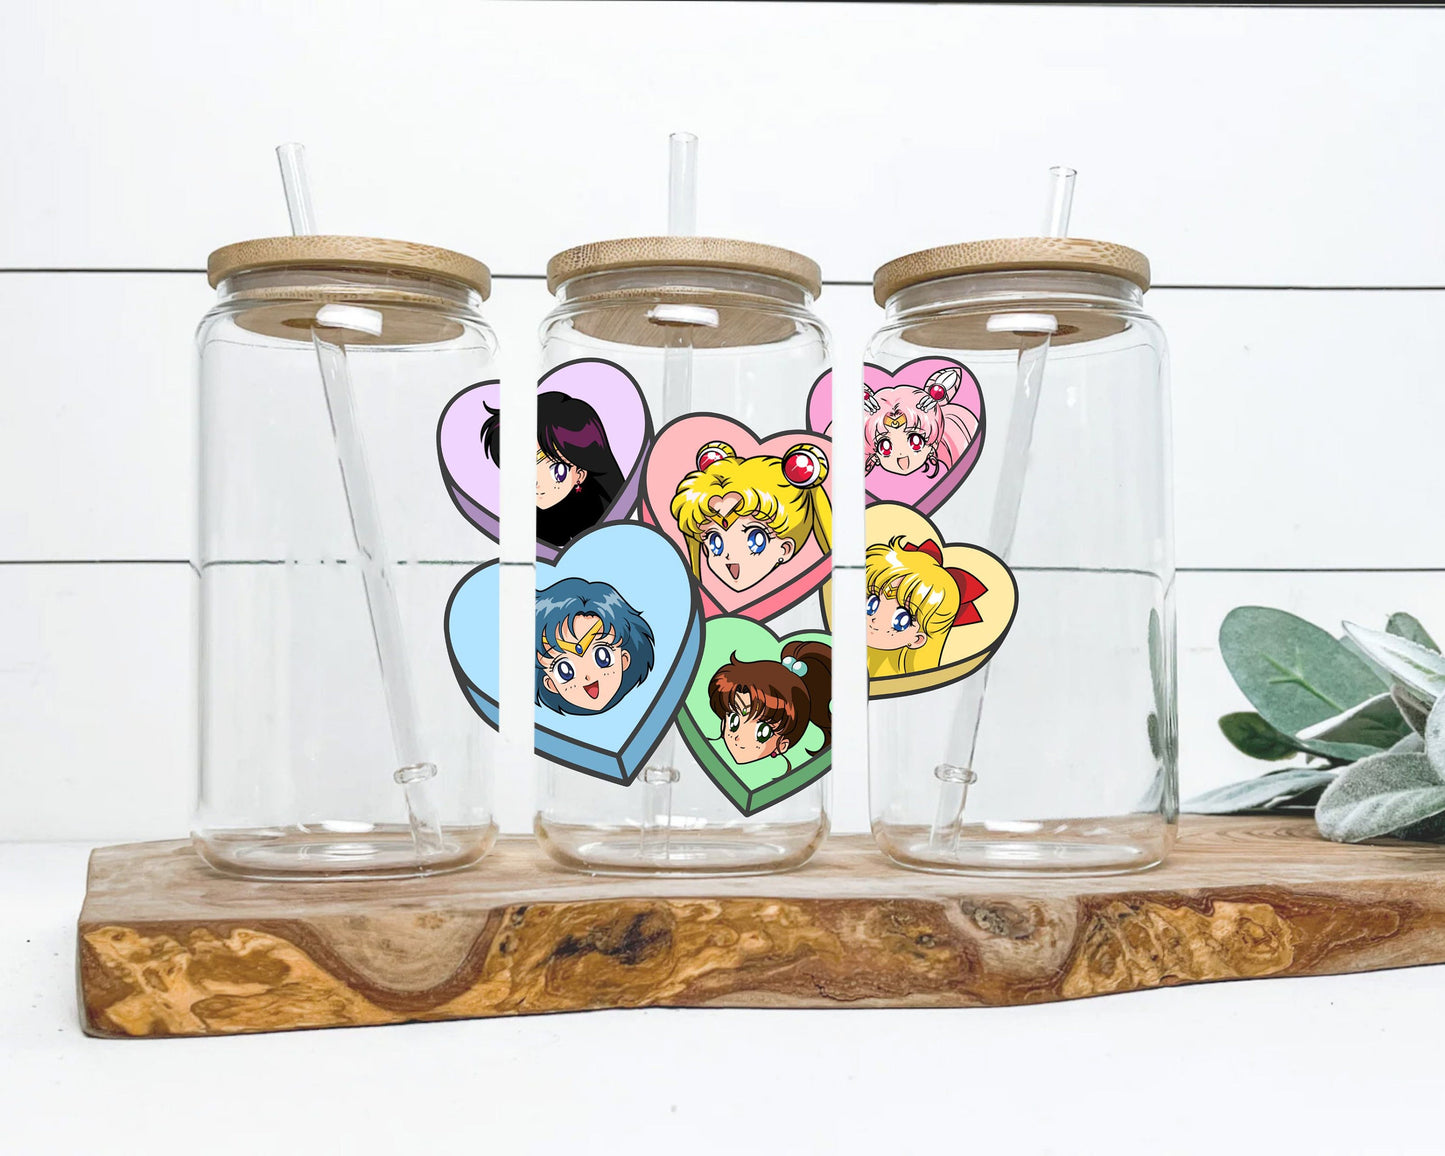 Sailor Moon Anime Cup Decal, Ready to Use Glass Cup Decal